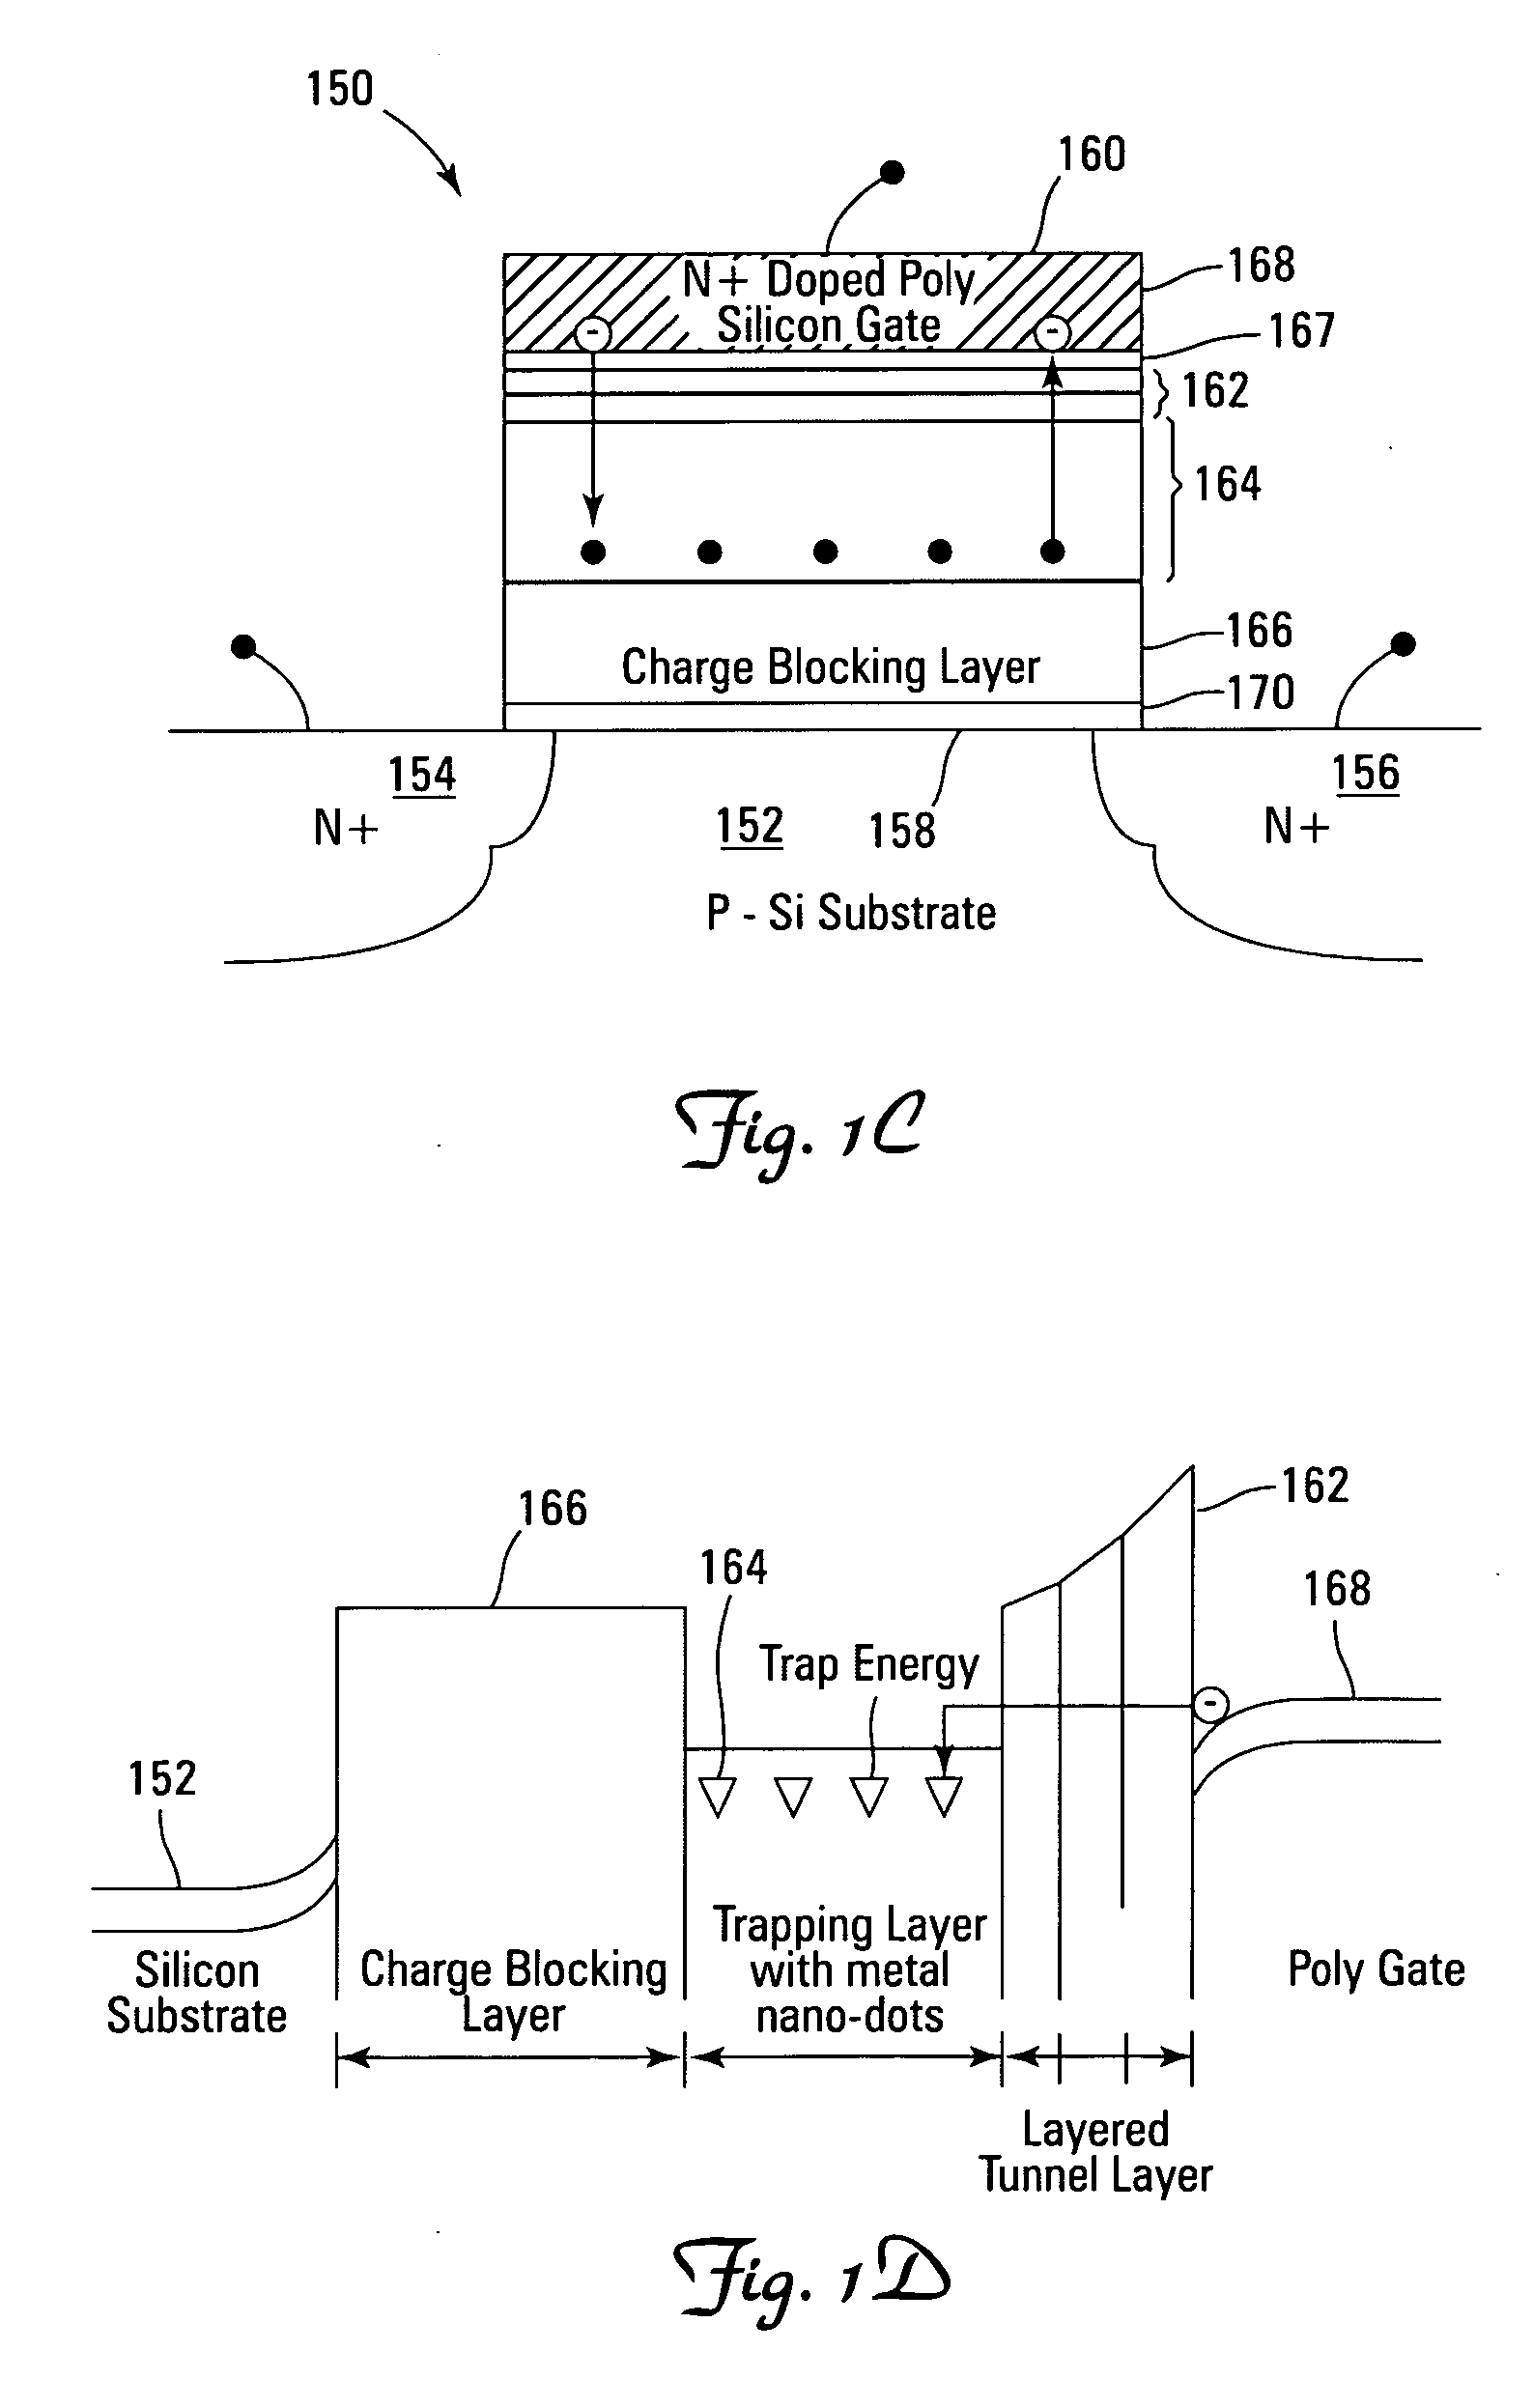 Novel low power non-volatile memory and gate stack